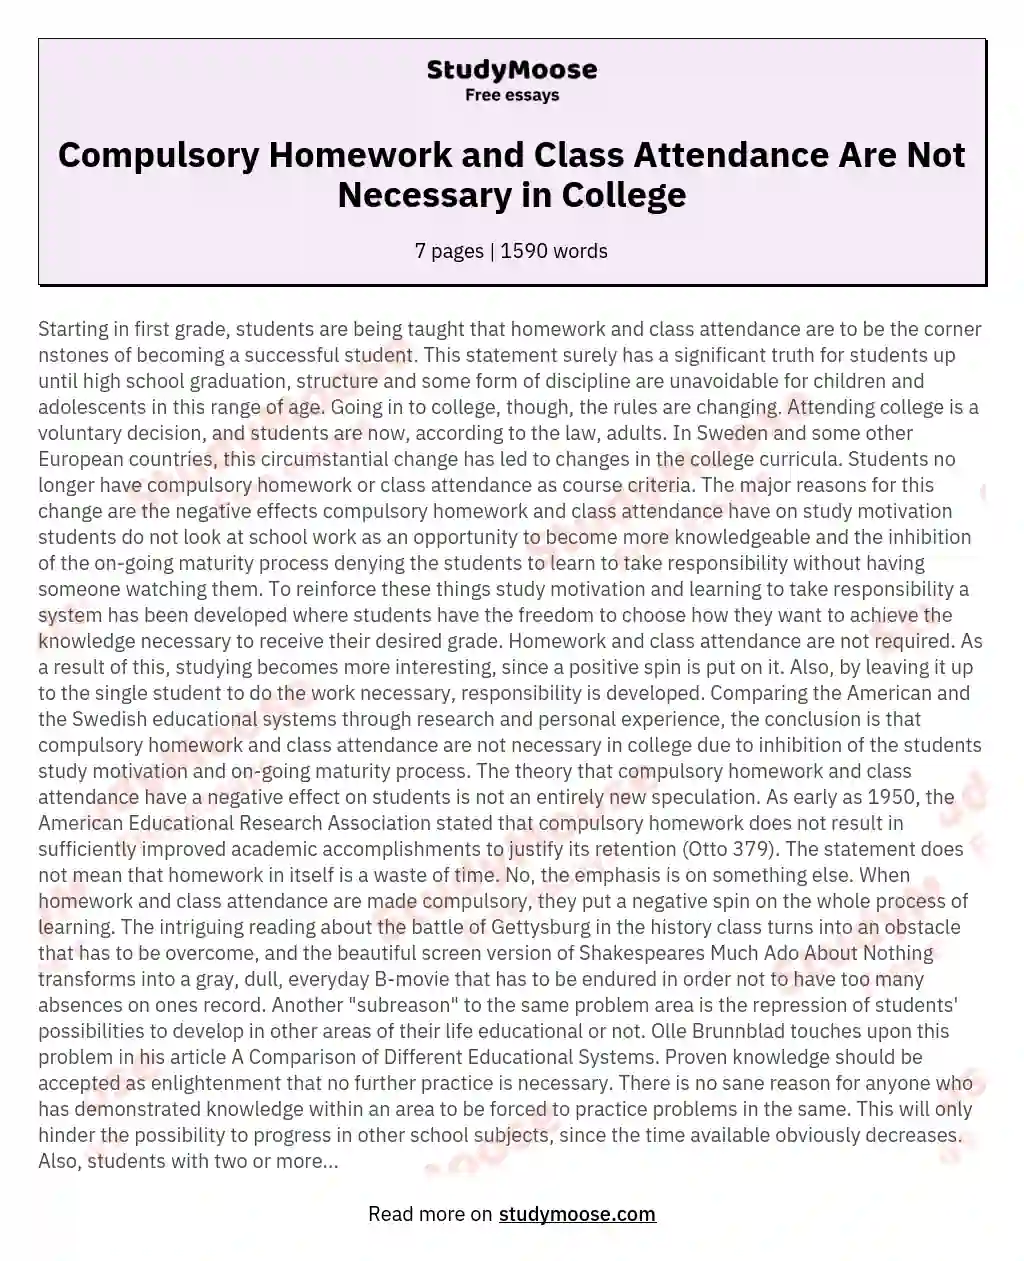 Compulsory Homework and Class Attendance Are Not Necessary in College essay